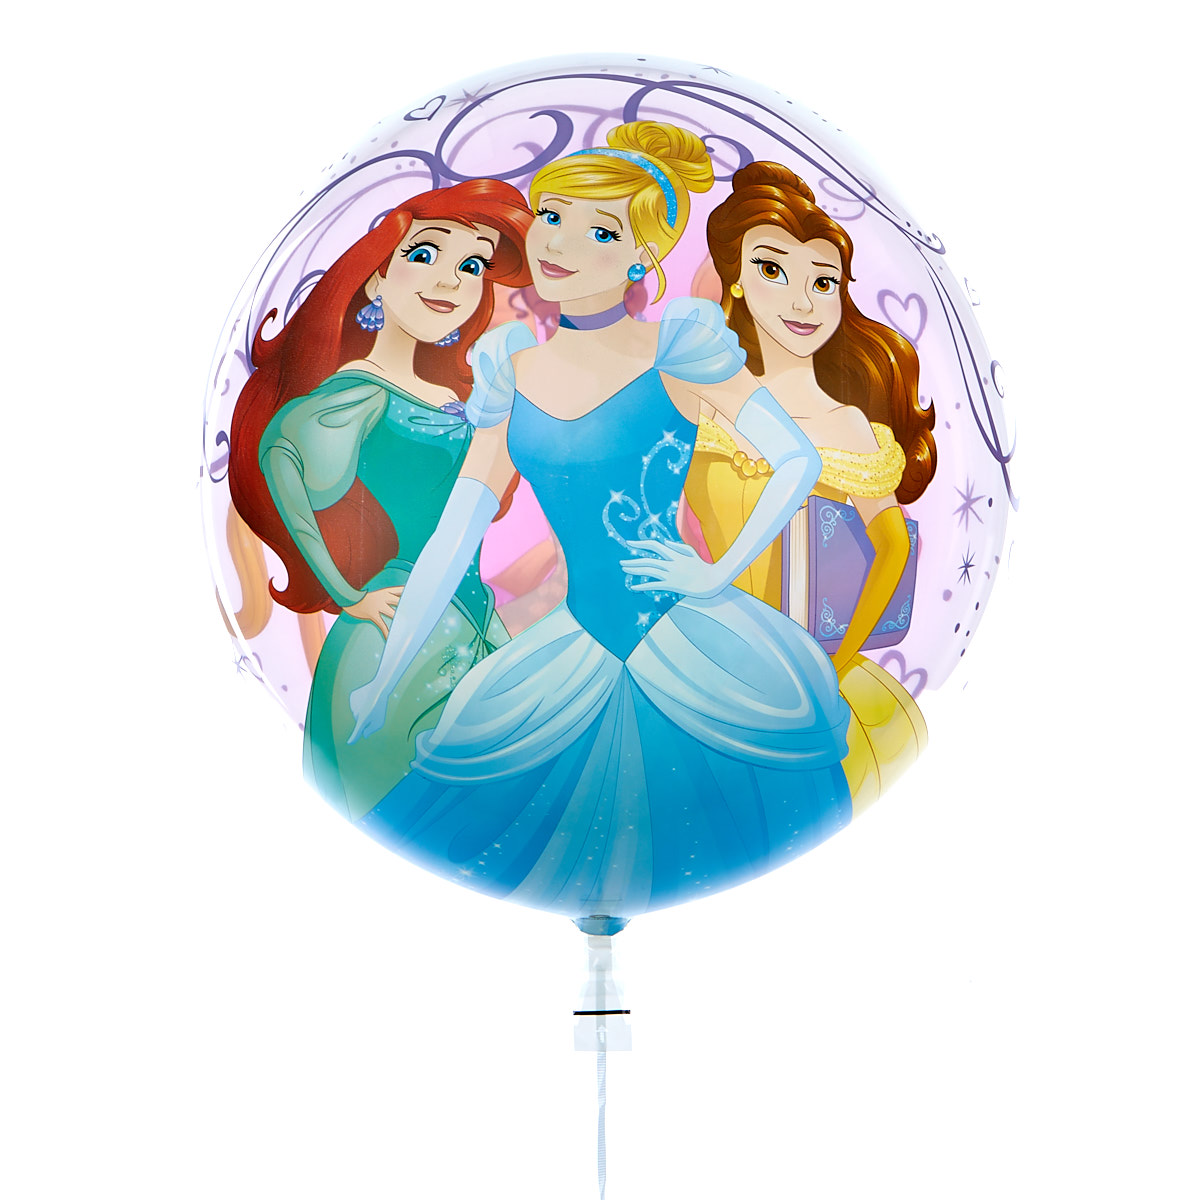 22-Inch Bubble Balloon - Disney Princesses - DELIVERED INFLATED!